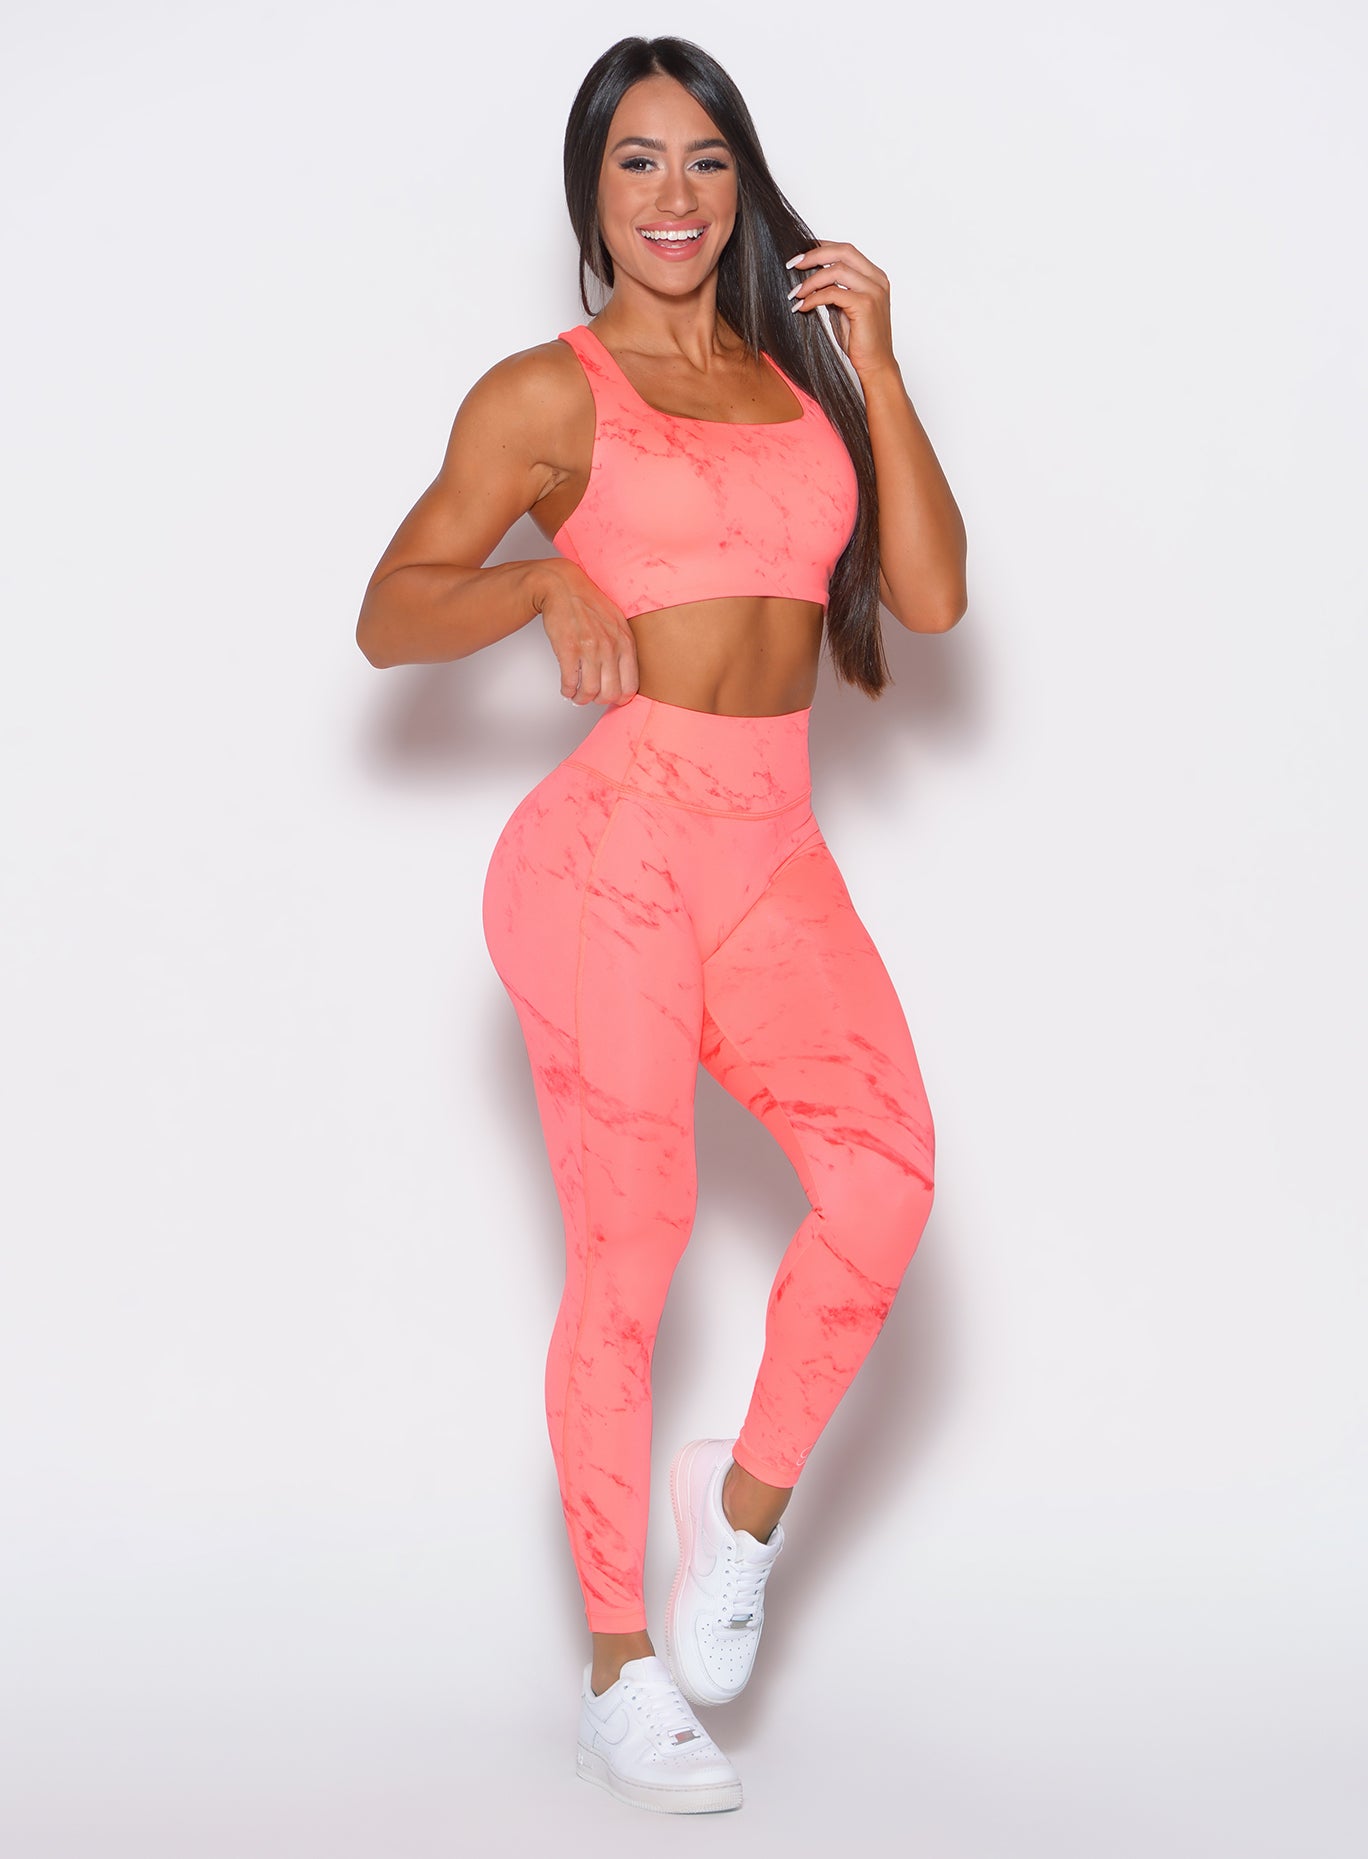 front profile view of a model facing forward wearing our fit marble leggings in Coral reef color along with a matching bra